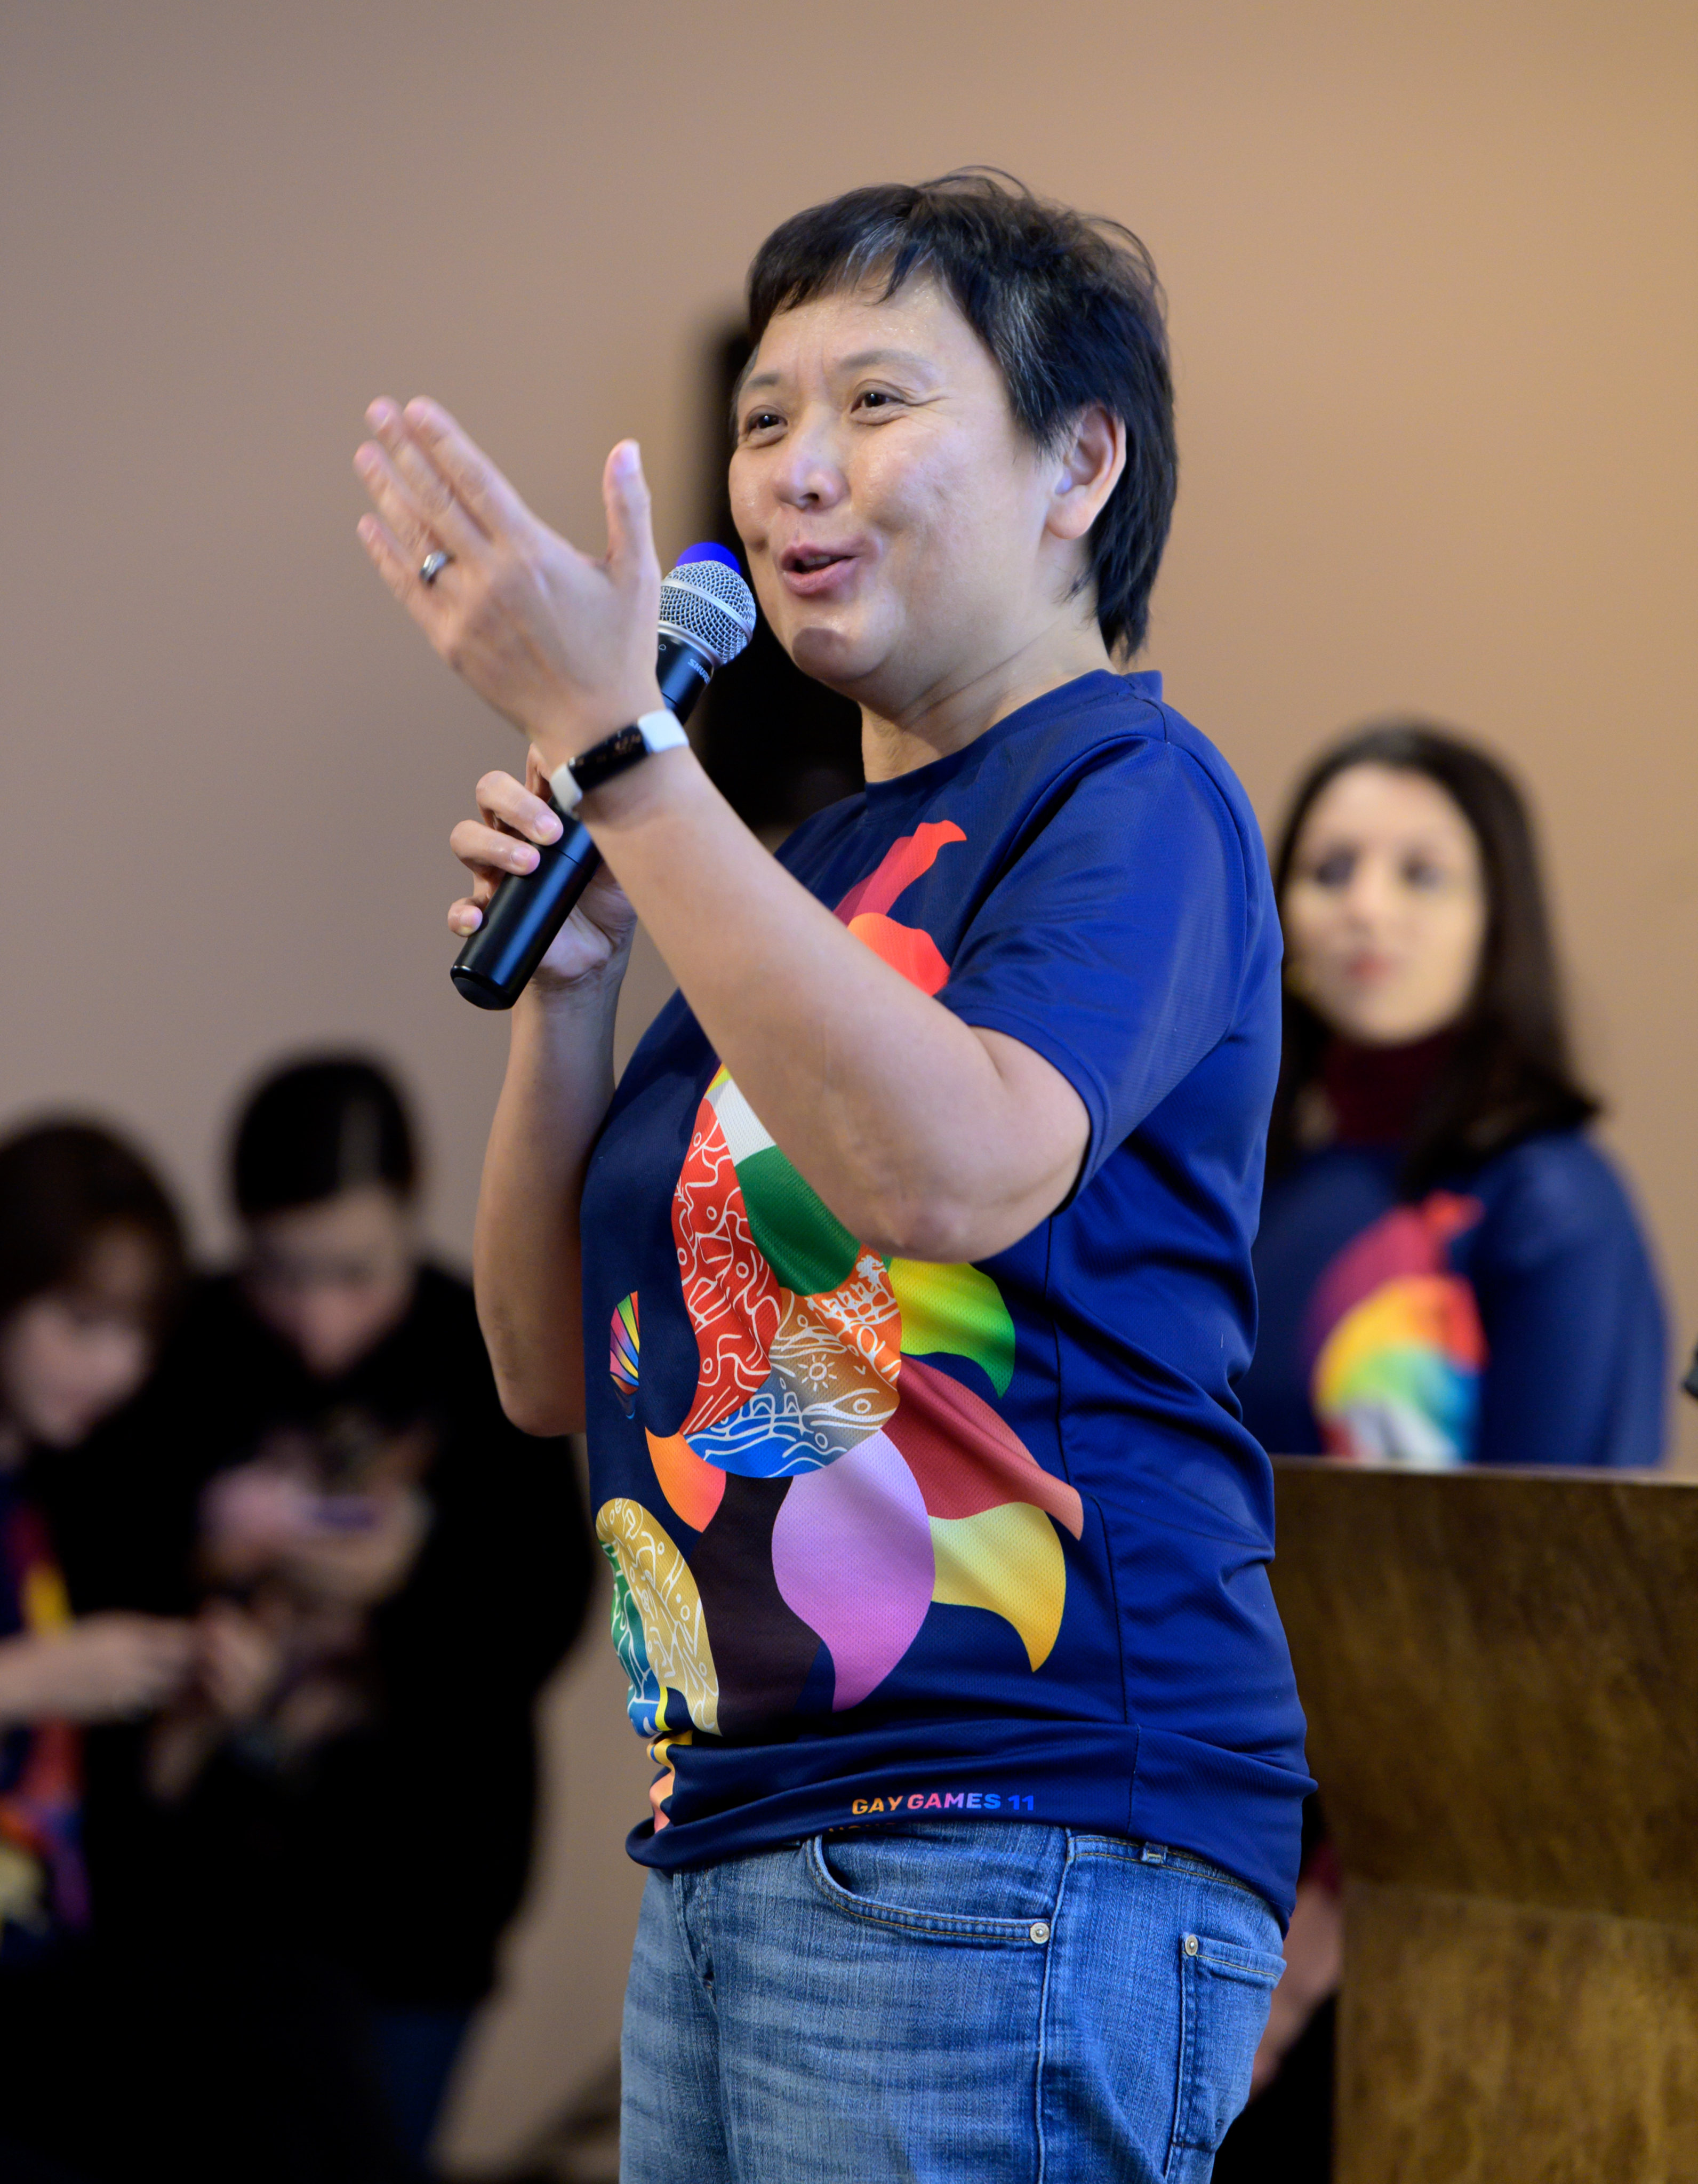 Lisa Lam, co-chair of the Gay Games Hong Kong, says she still returns to the Zhuangzi, an ancient Chinese text, from time to time, especially when she feels stuck or unhappy. Photo: Lisa Lam Mun-wai